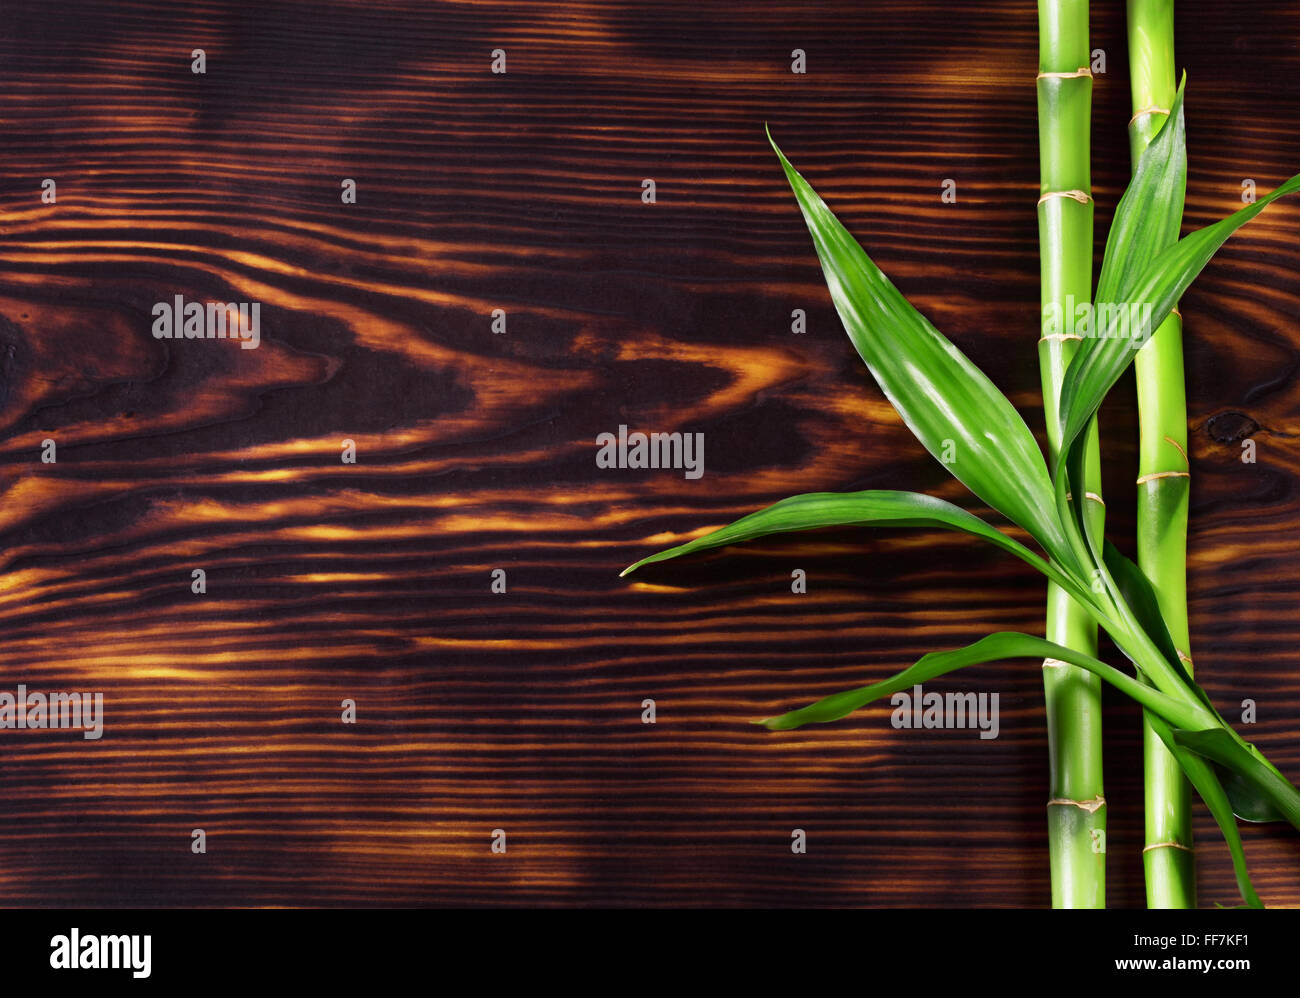 Fresh green bamboo on a wooden background Stock Photo